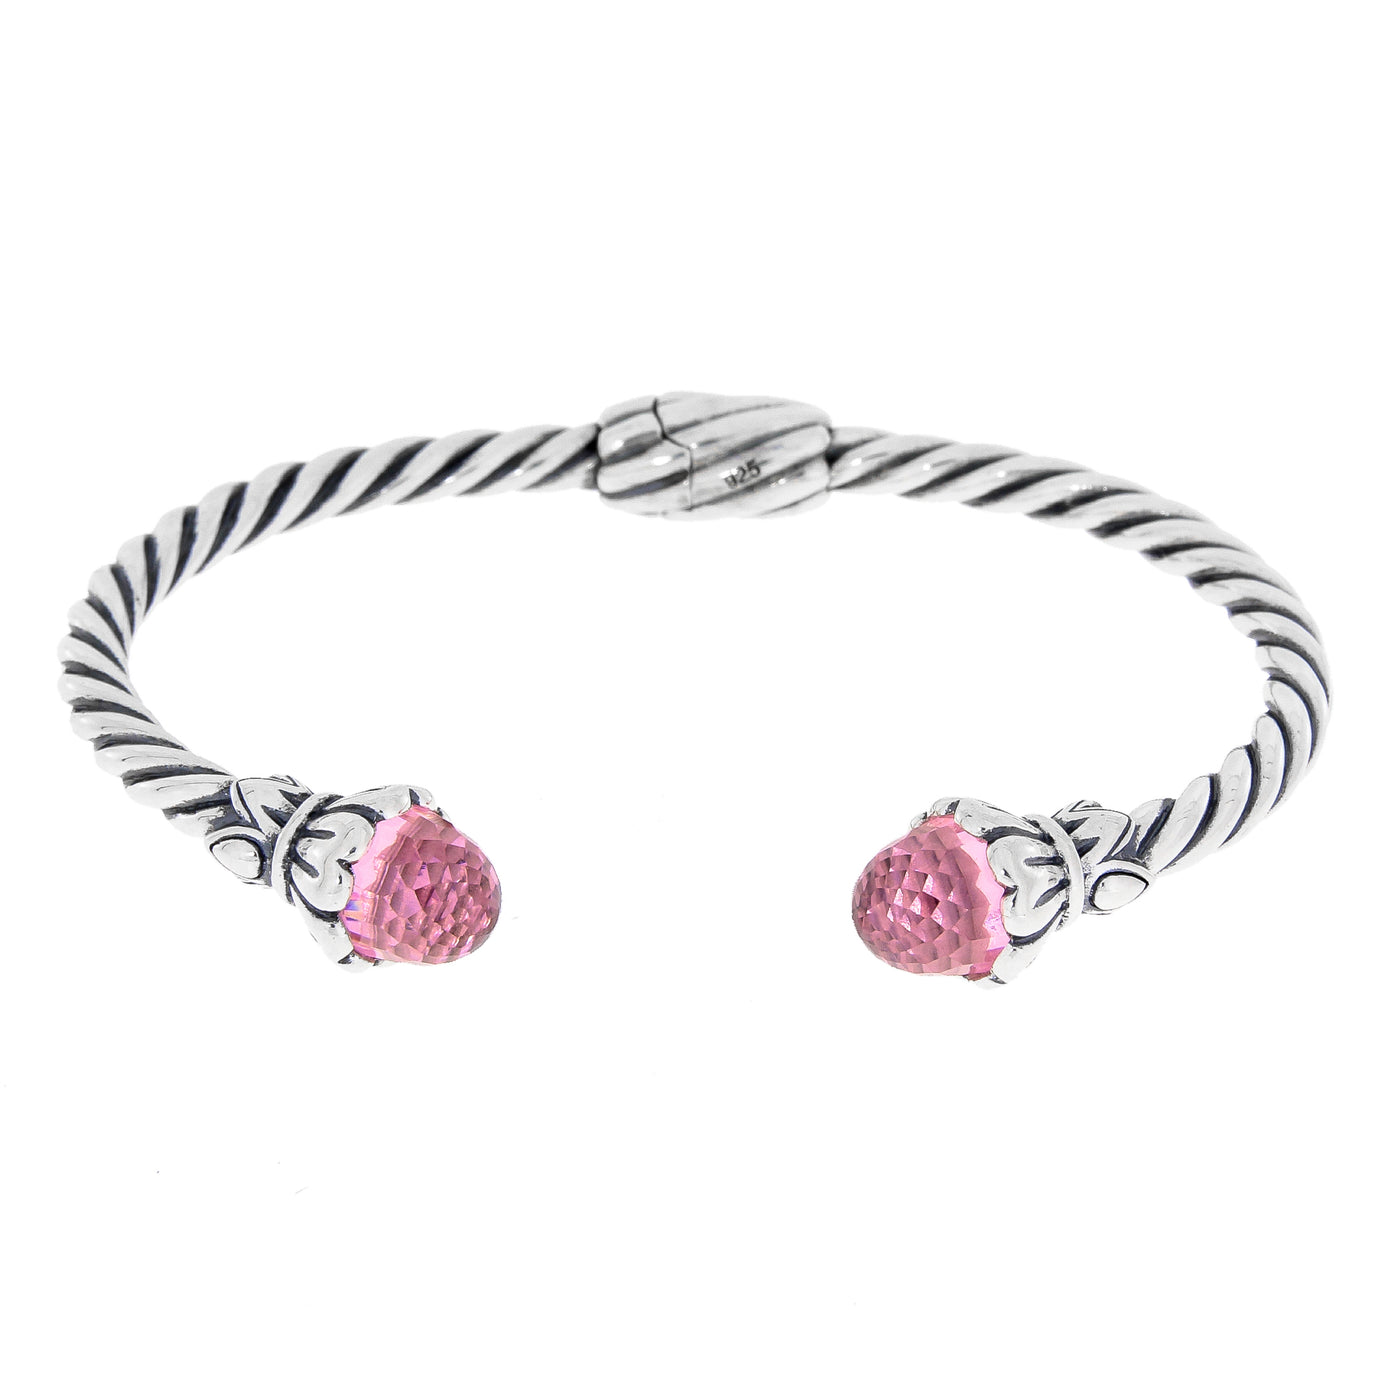 Twisted Spiral Cable 925 Sterling Silver Vintage Cuff Bracelet With Pink Cubic Zirconium Gemstones